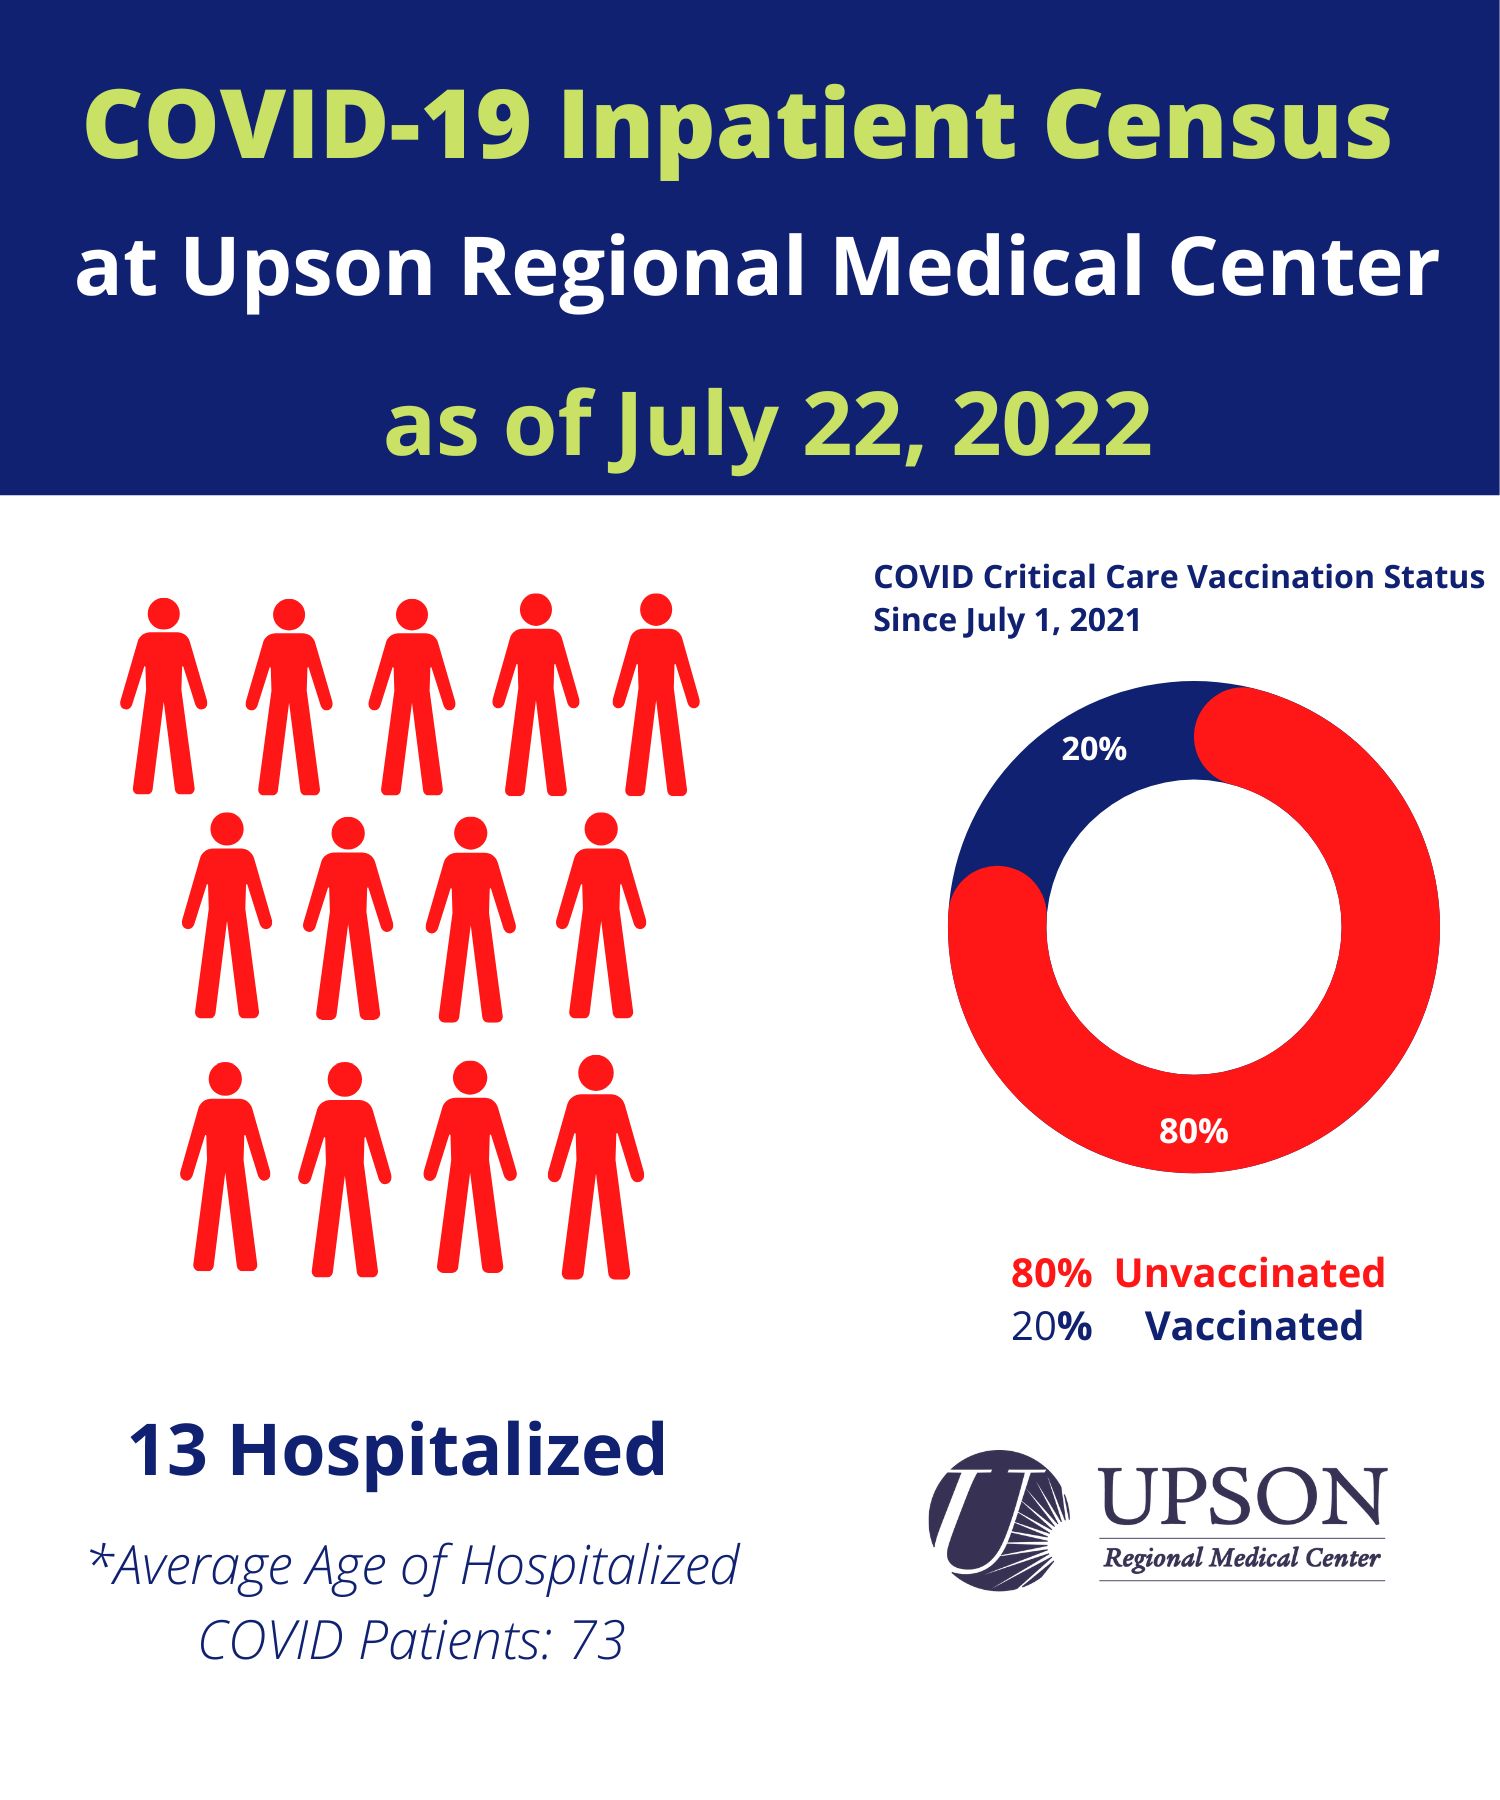 Photo for URMC COVID-19 Inpatient Status as of July 22, 2022